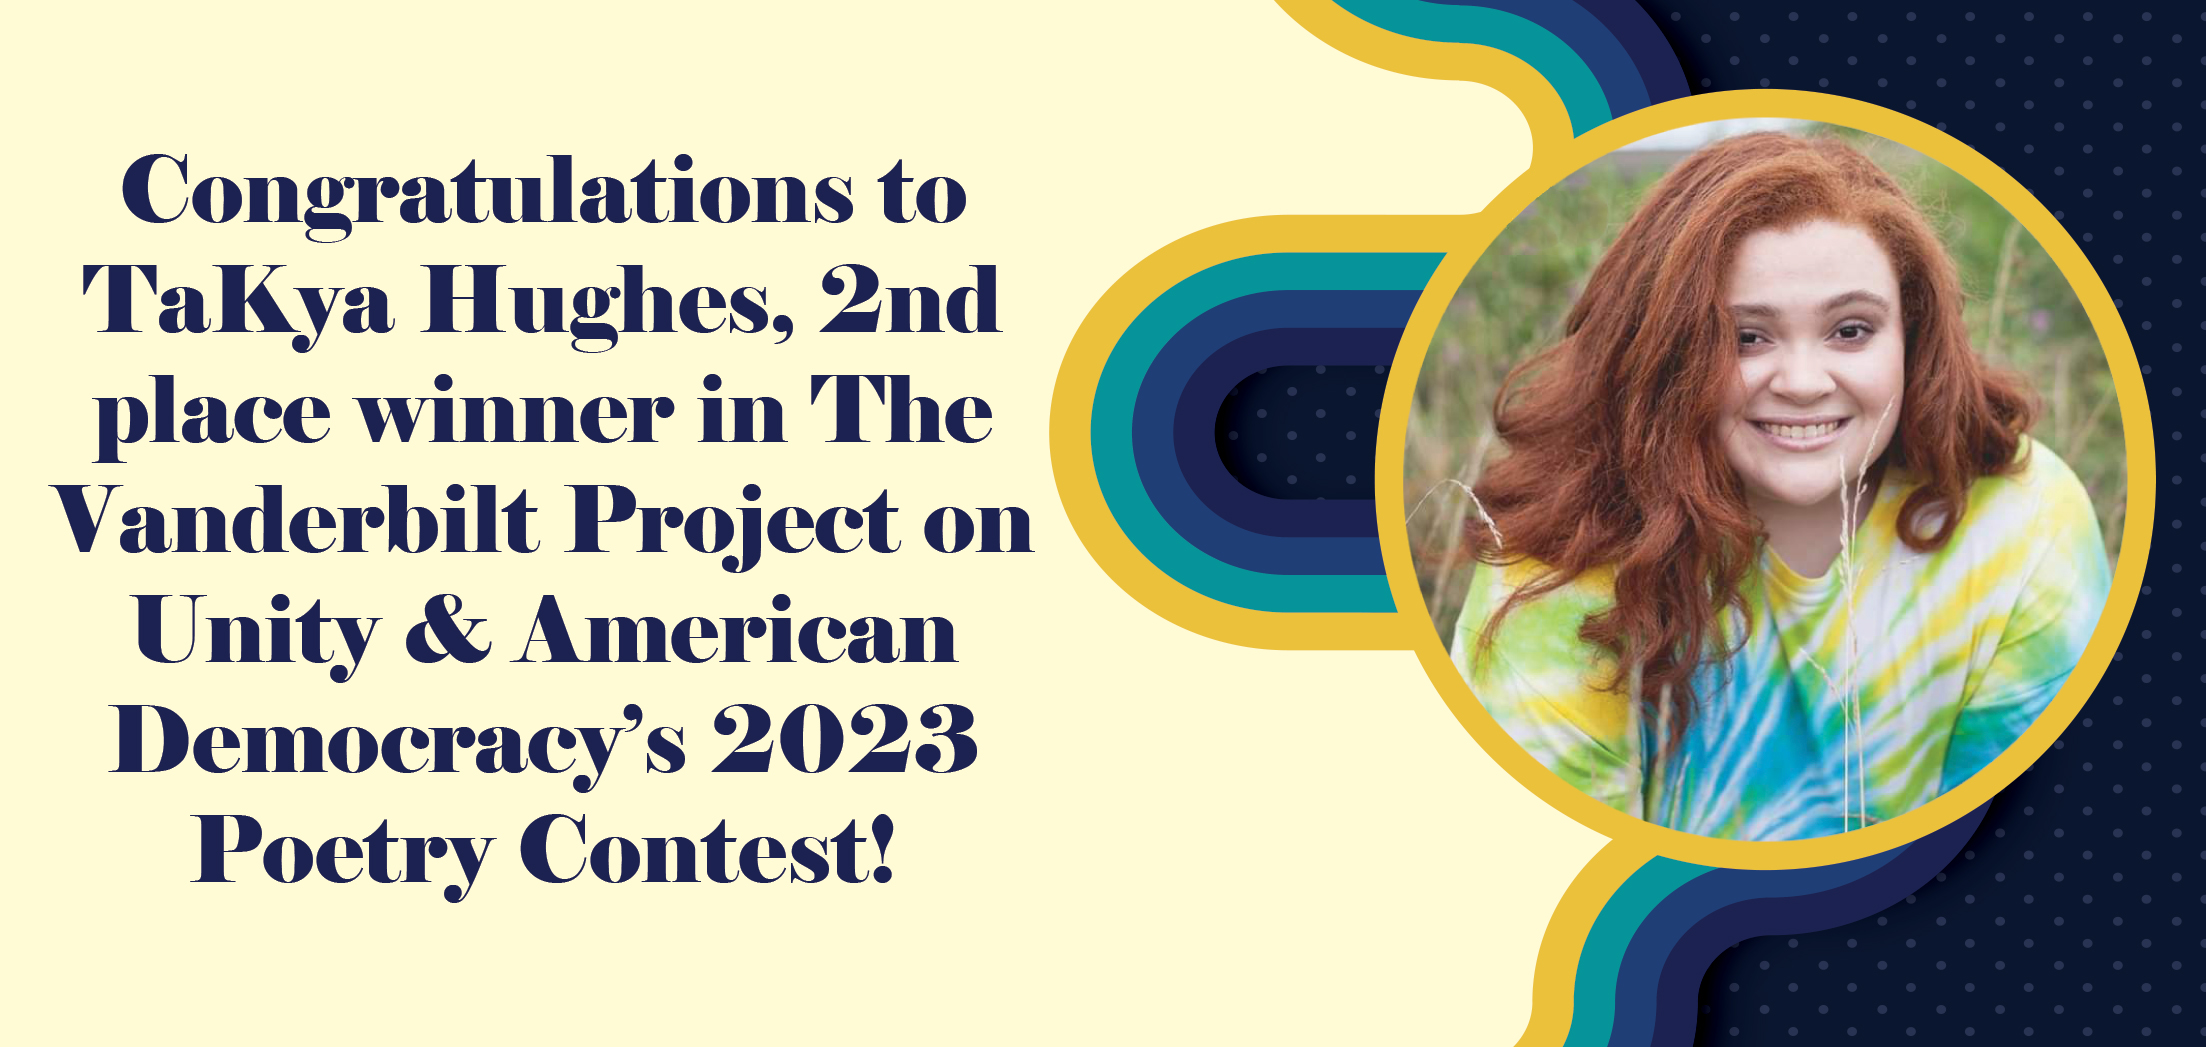 Abstract blue and gold background with a photo of TaKya on the right. The left text says, "Congratulations to TaKya Hughes, 2nd place winner in The Vanderbilt Project on Unity & American Democracy's 2023 Poetry Contest!"